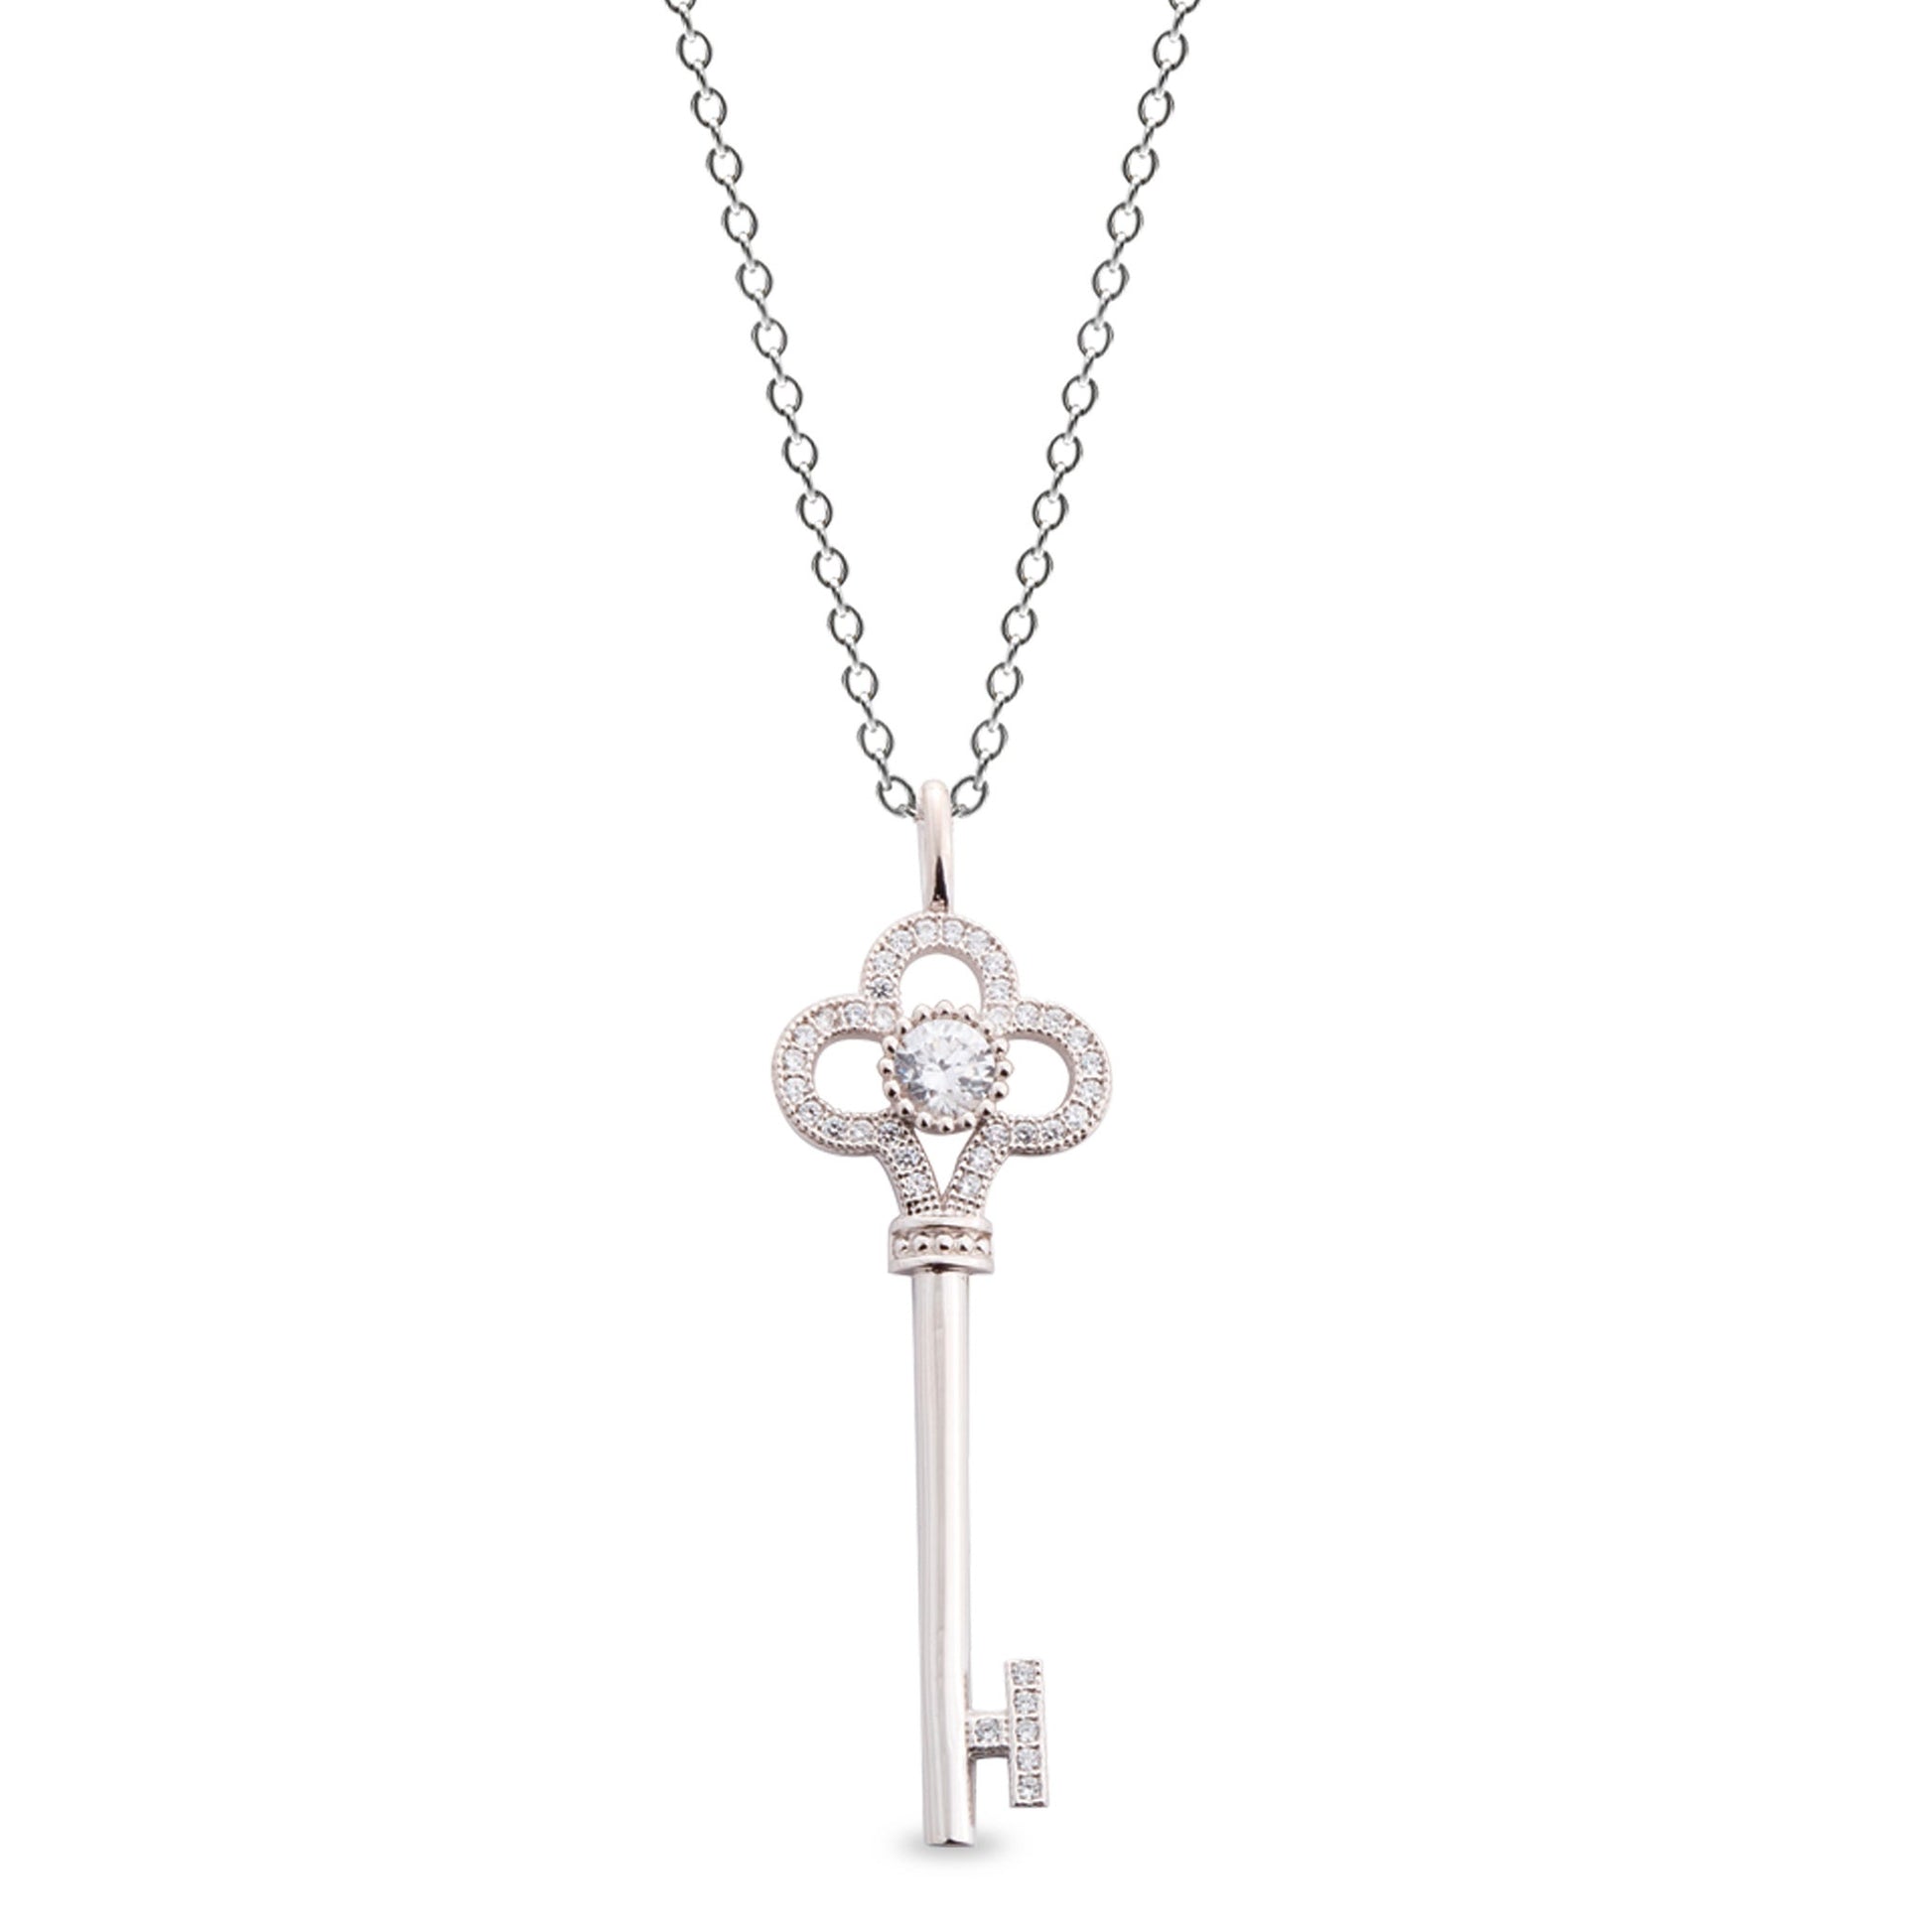 A sterling silver flower key necklace with 33 simulated diamonds displayed on a neutral white background.